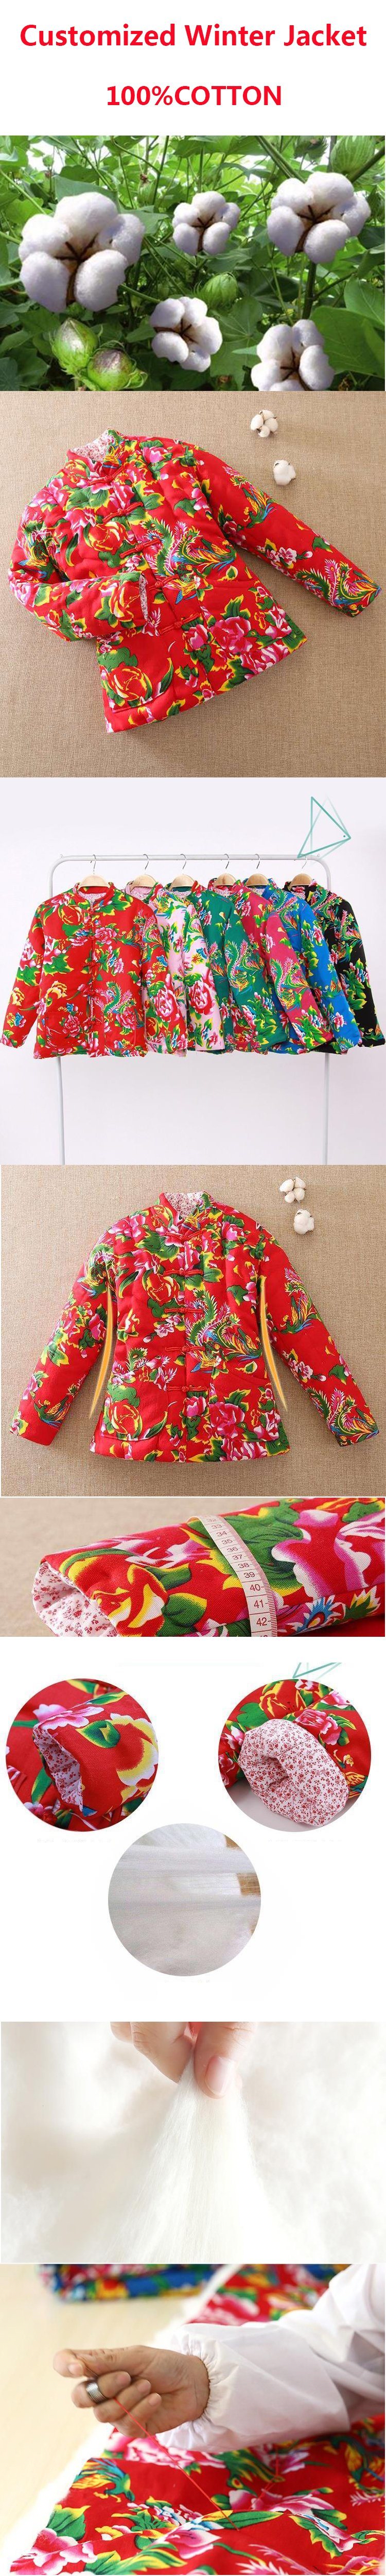 100%Cotton Handmade and Customized Winter Jacket Cotton Clothing Down Coat